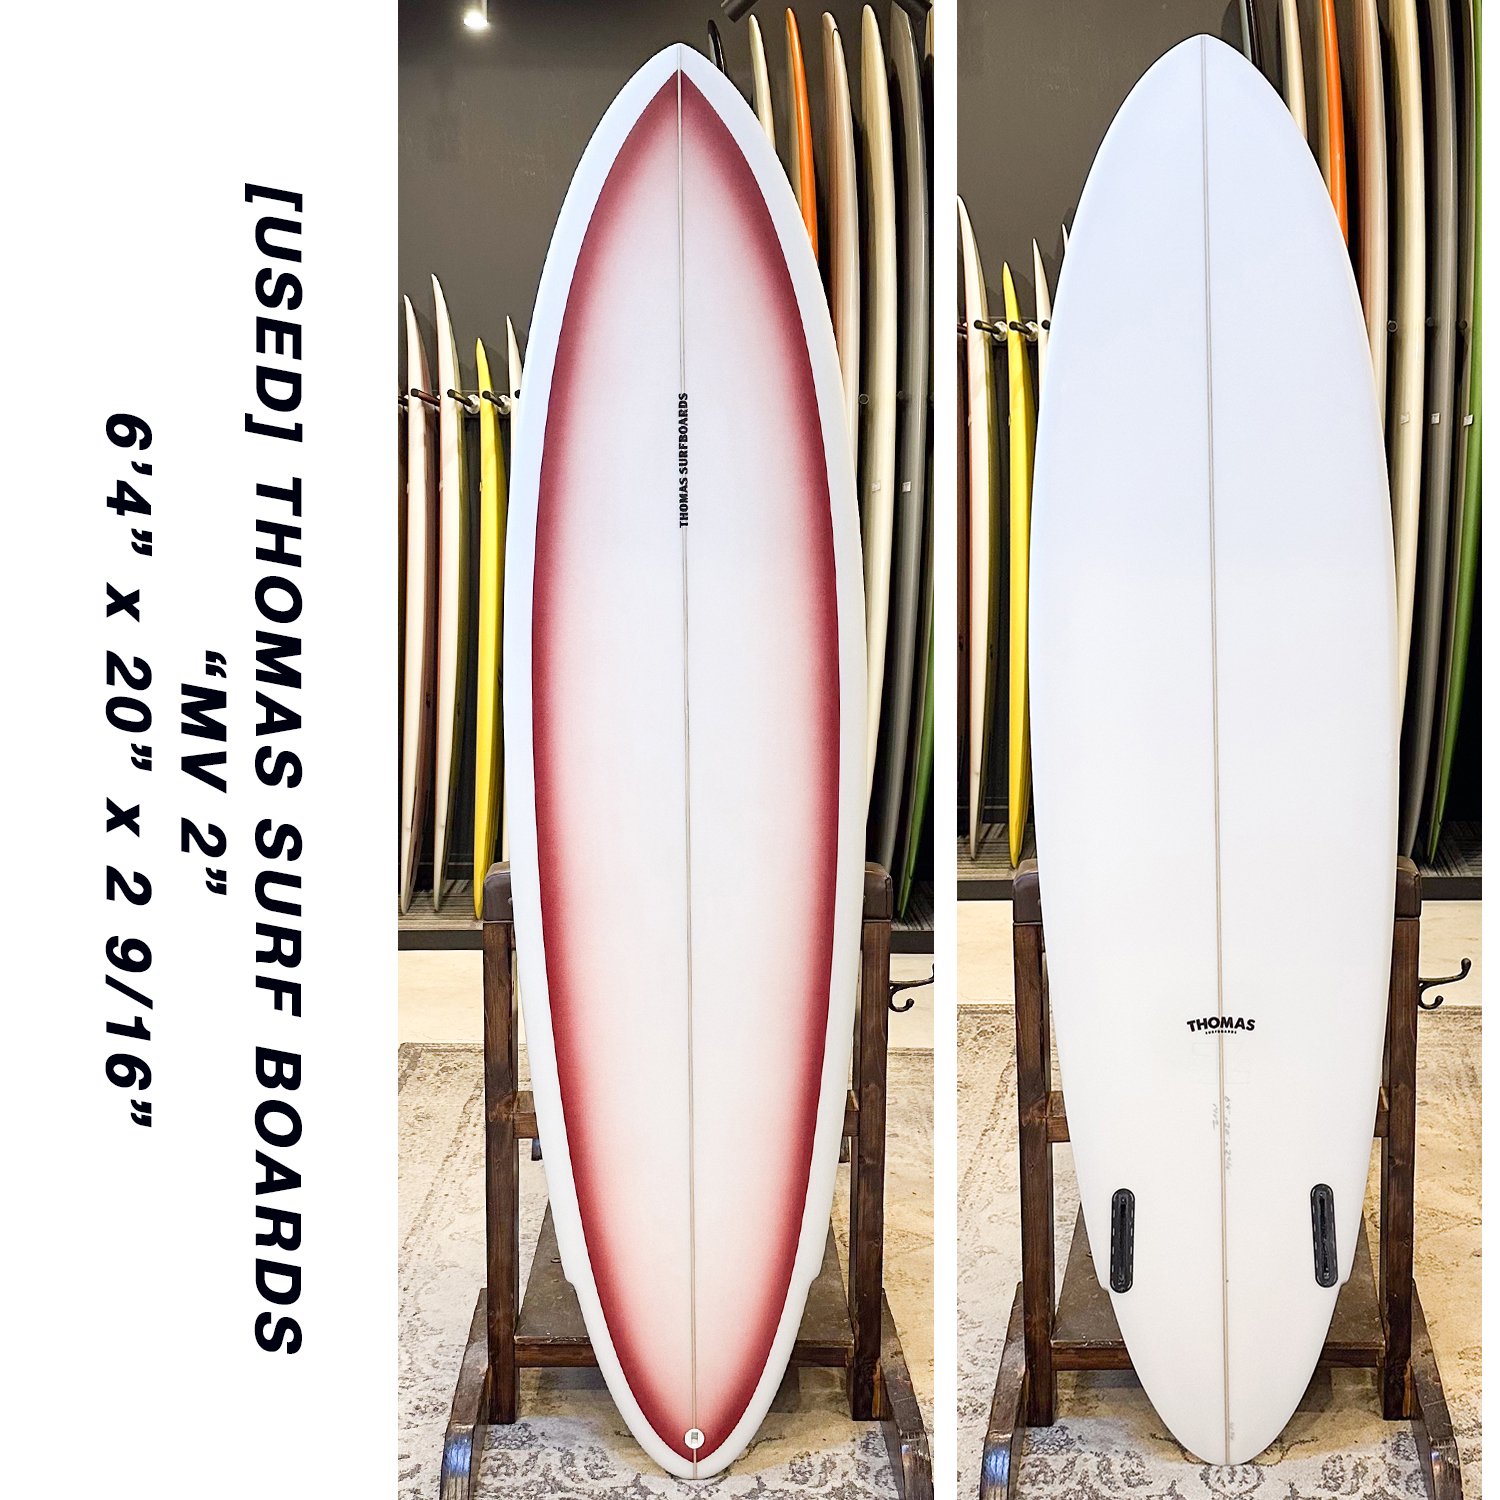 <img class='new_mark_img1' src='https://img.shop-pro.jp/img/new/icons14.gif' style='border:none;display:inline;margin:0px;padding:0px;width:auto;' />USED BOARDThomas surfboards MV 2 6'4"  FINå()